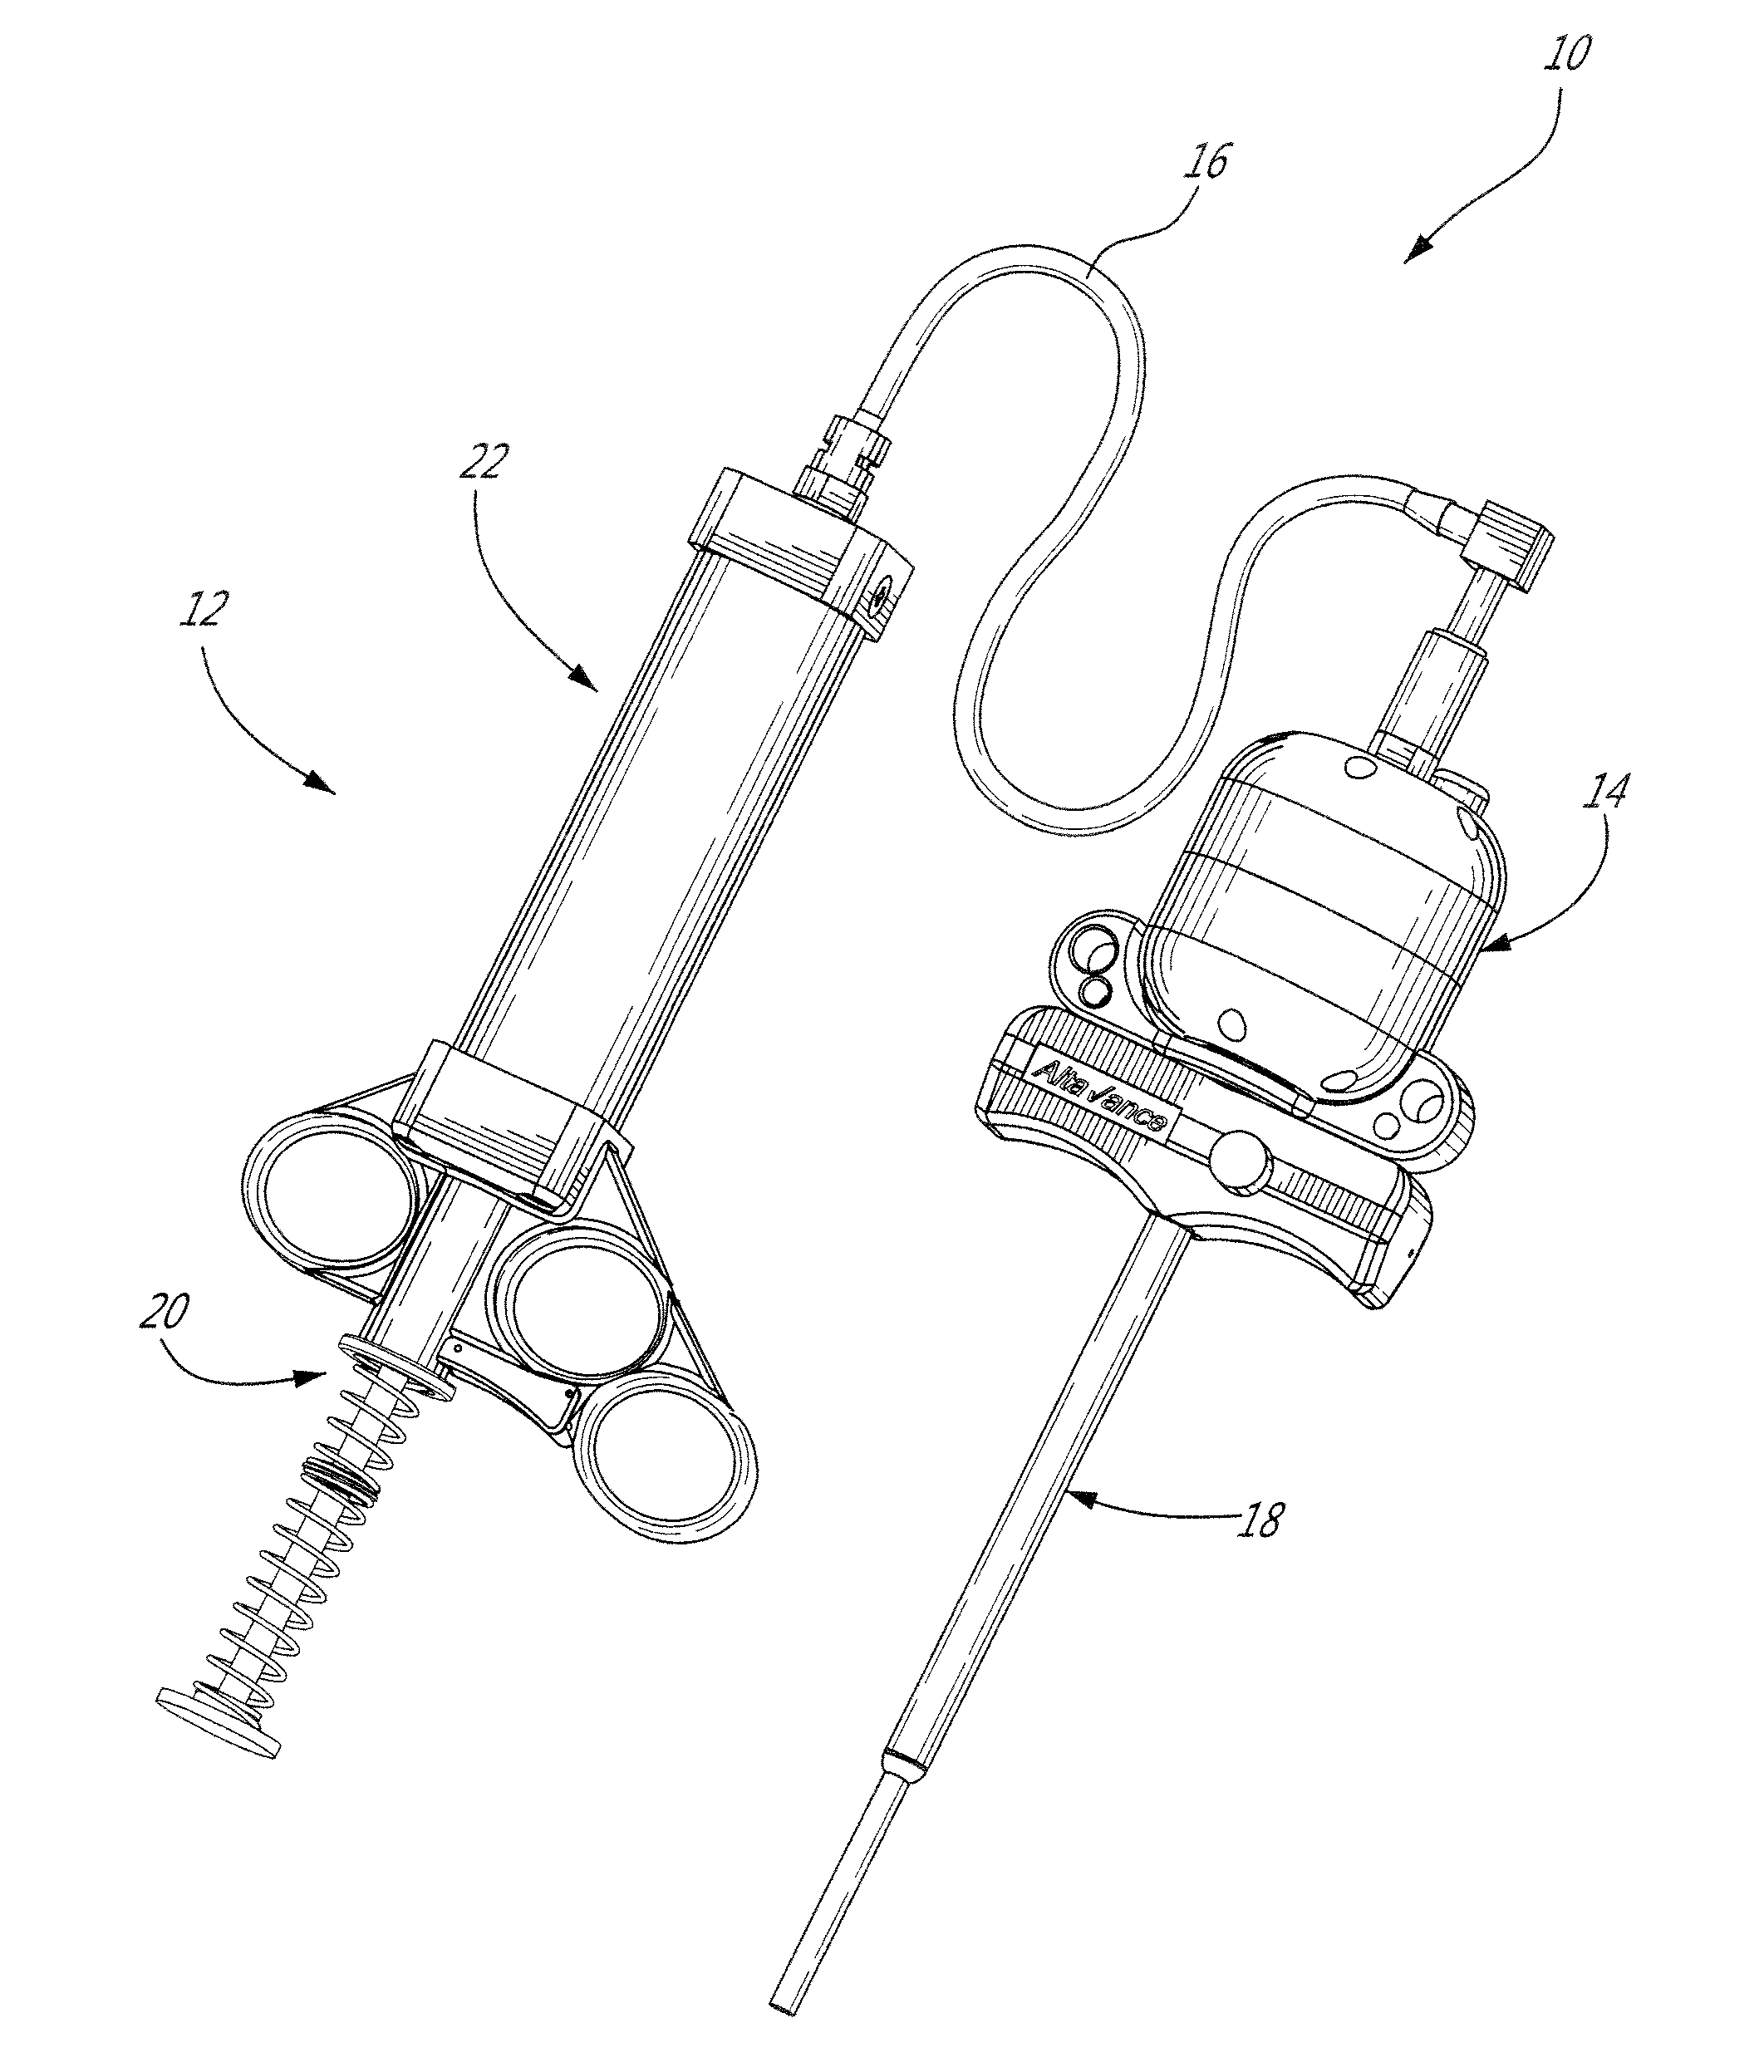 Bone cement injection device